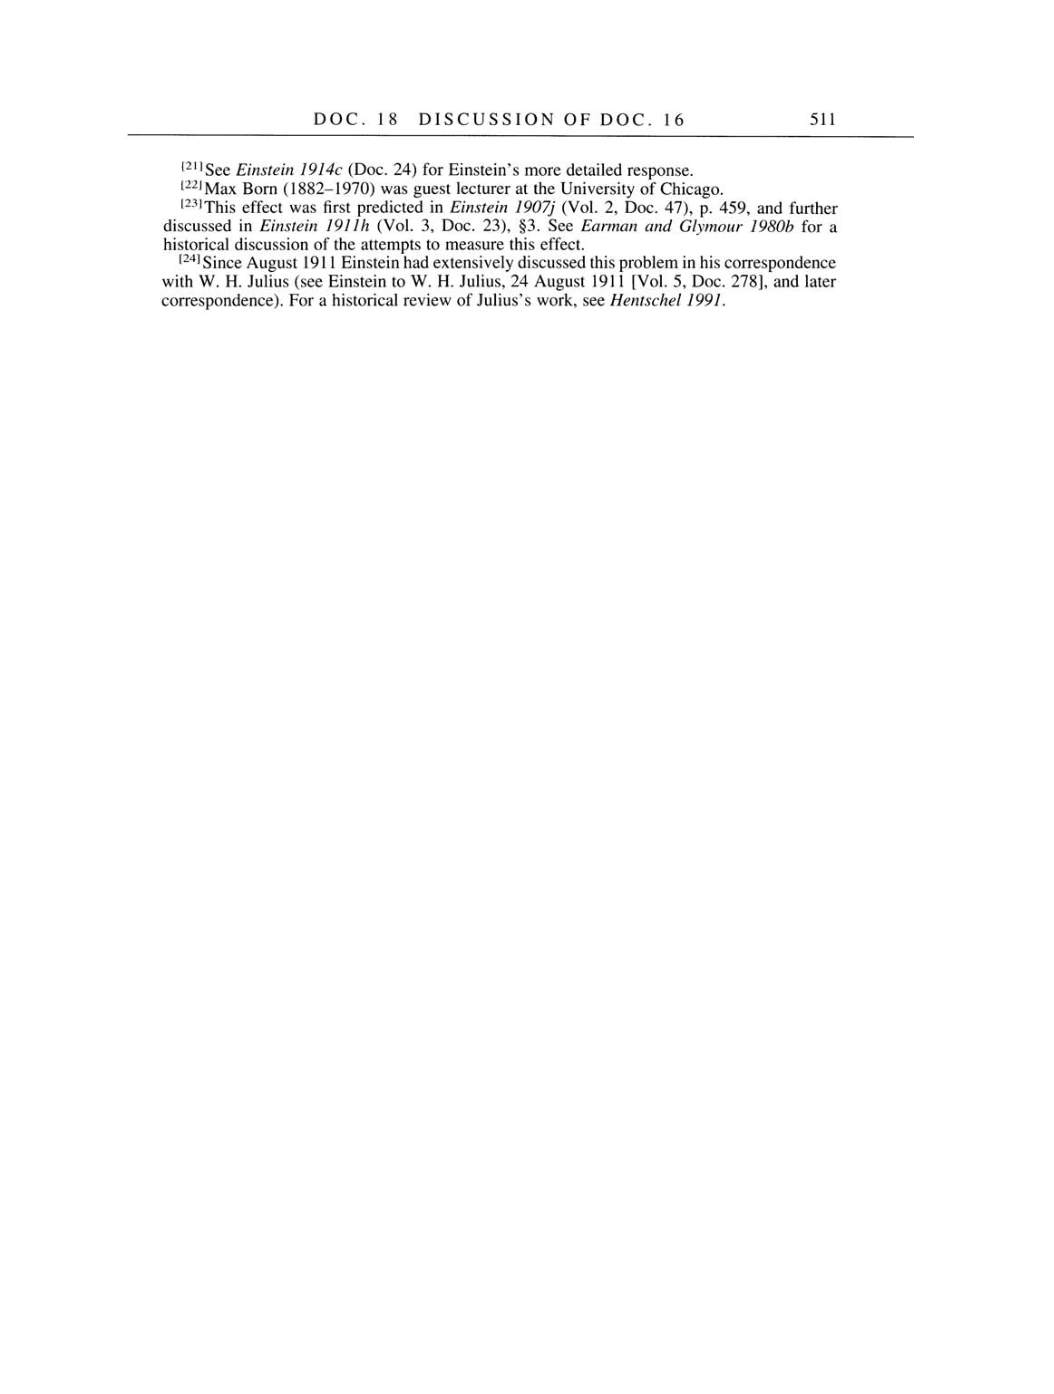 Volume 4: The Swiss Years: Writings 1912-1914 page 511